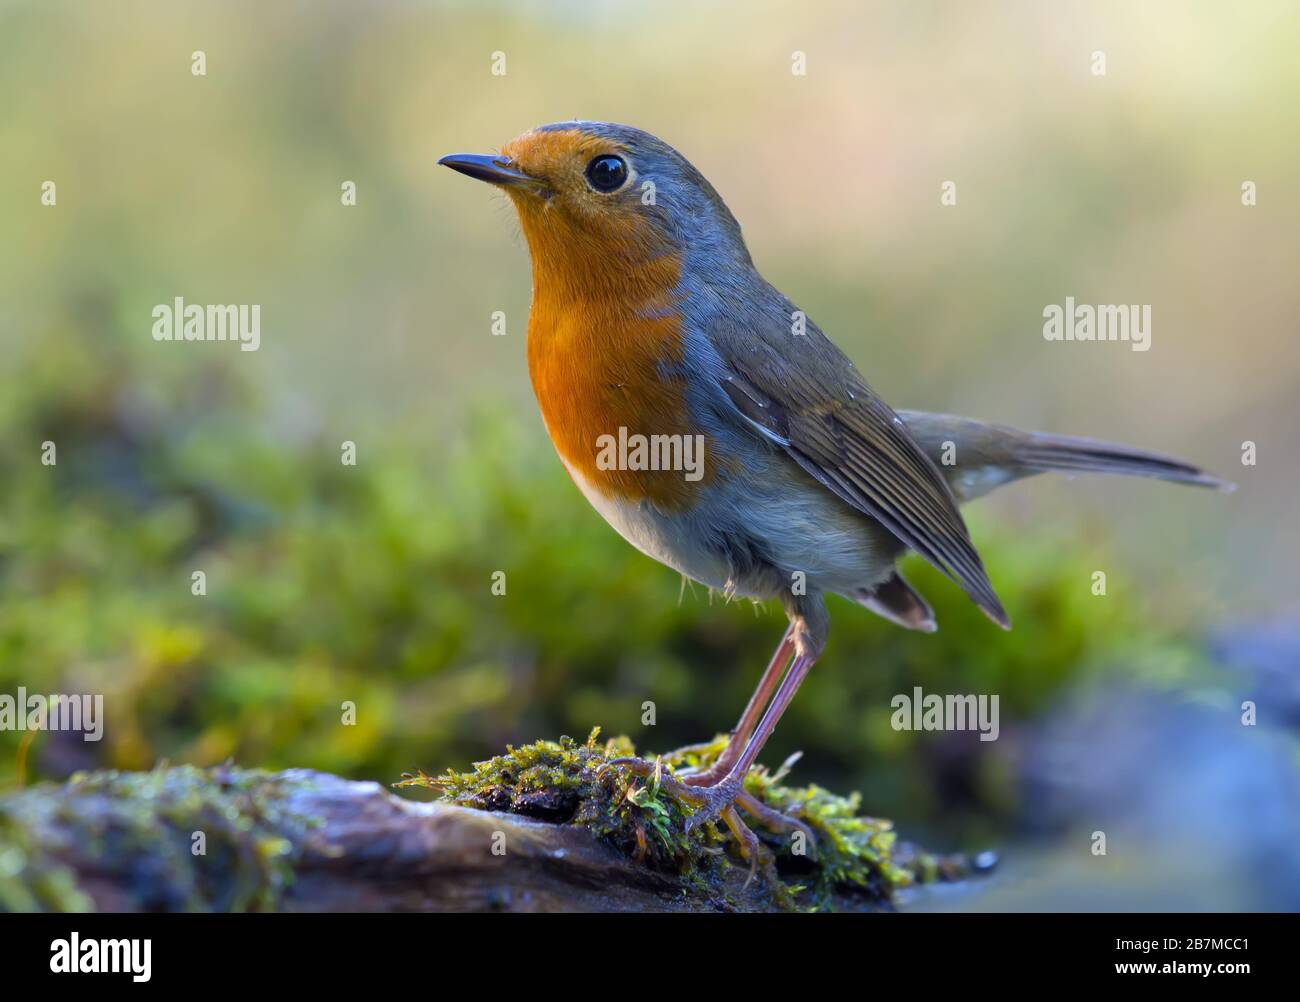 Mature European Robin (erithacus rubecula) fine posing on a moss covered old tree trunk in mossy environment Stock Photo